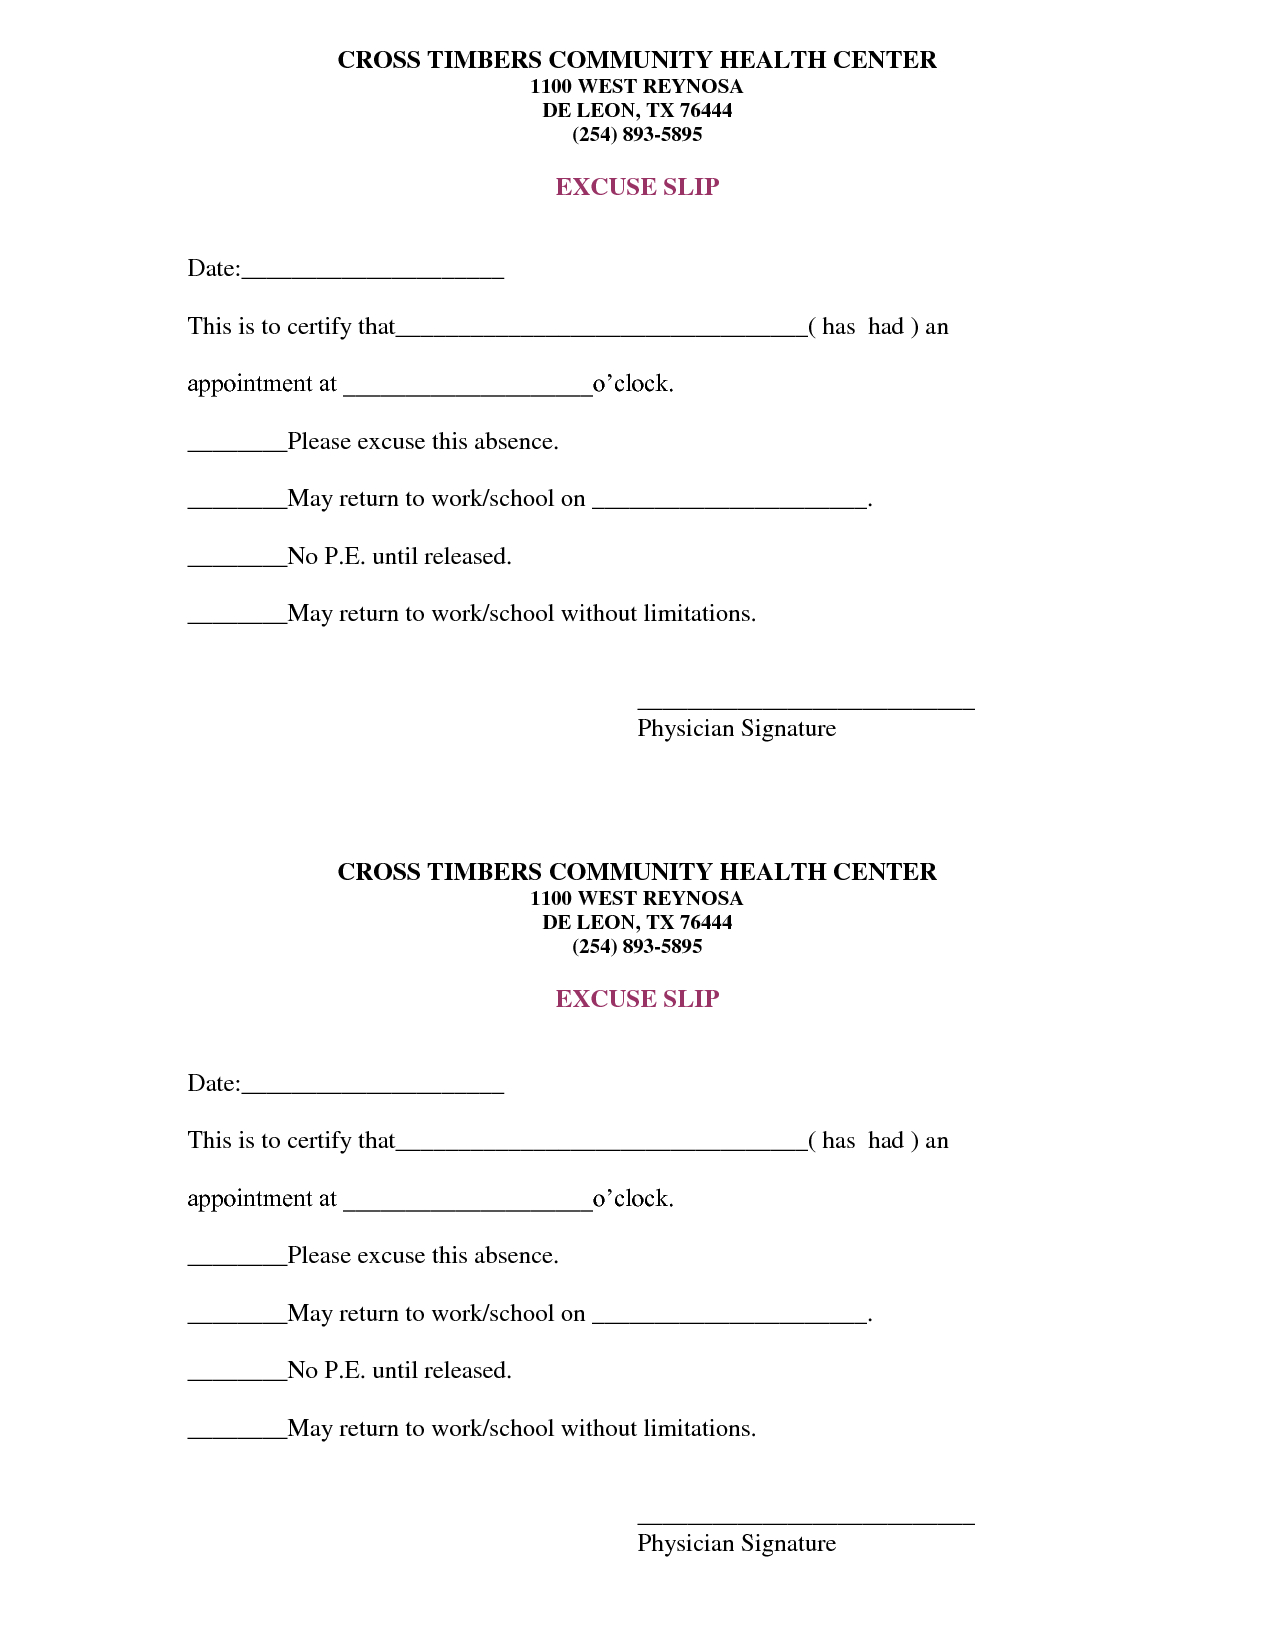 Free Doctors Note Template | Scope Of Work Template | On The Run - Free Printable Doctors Excuse For School